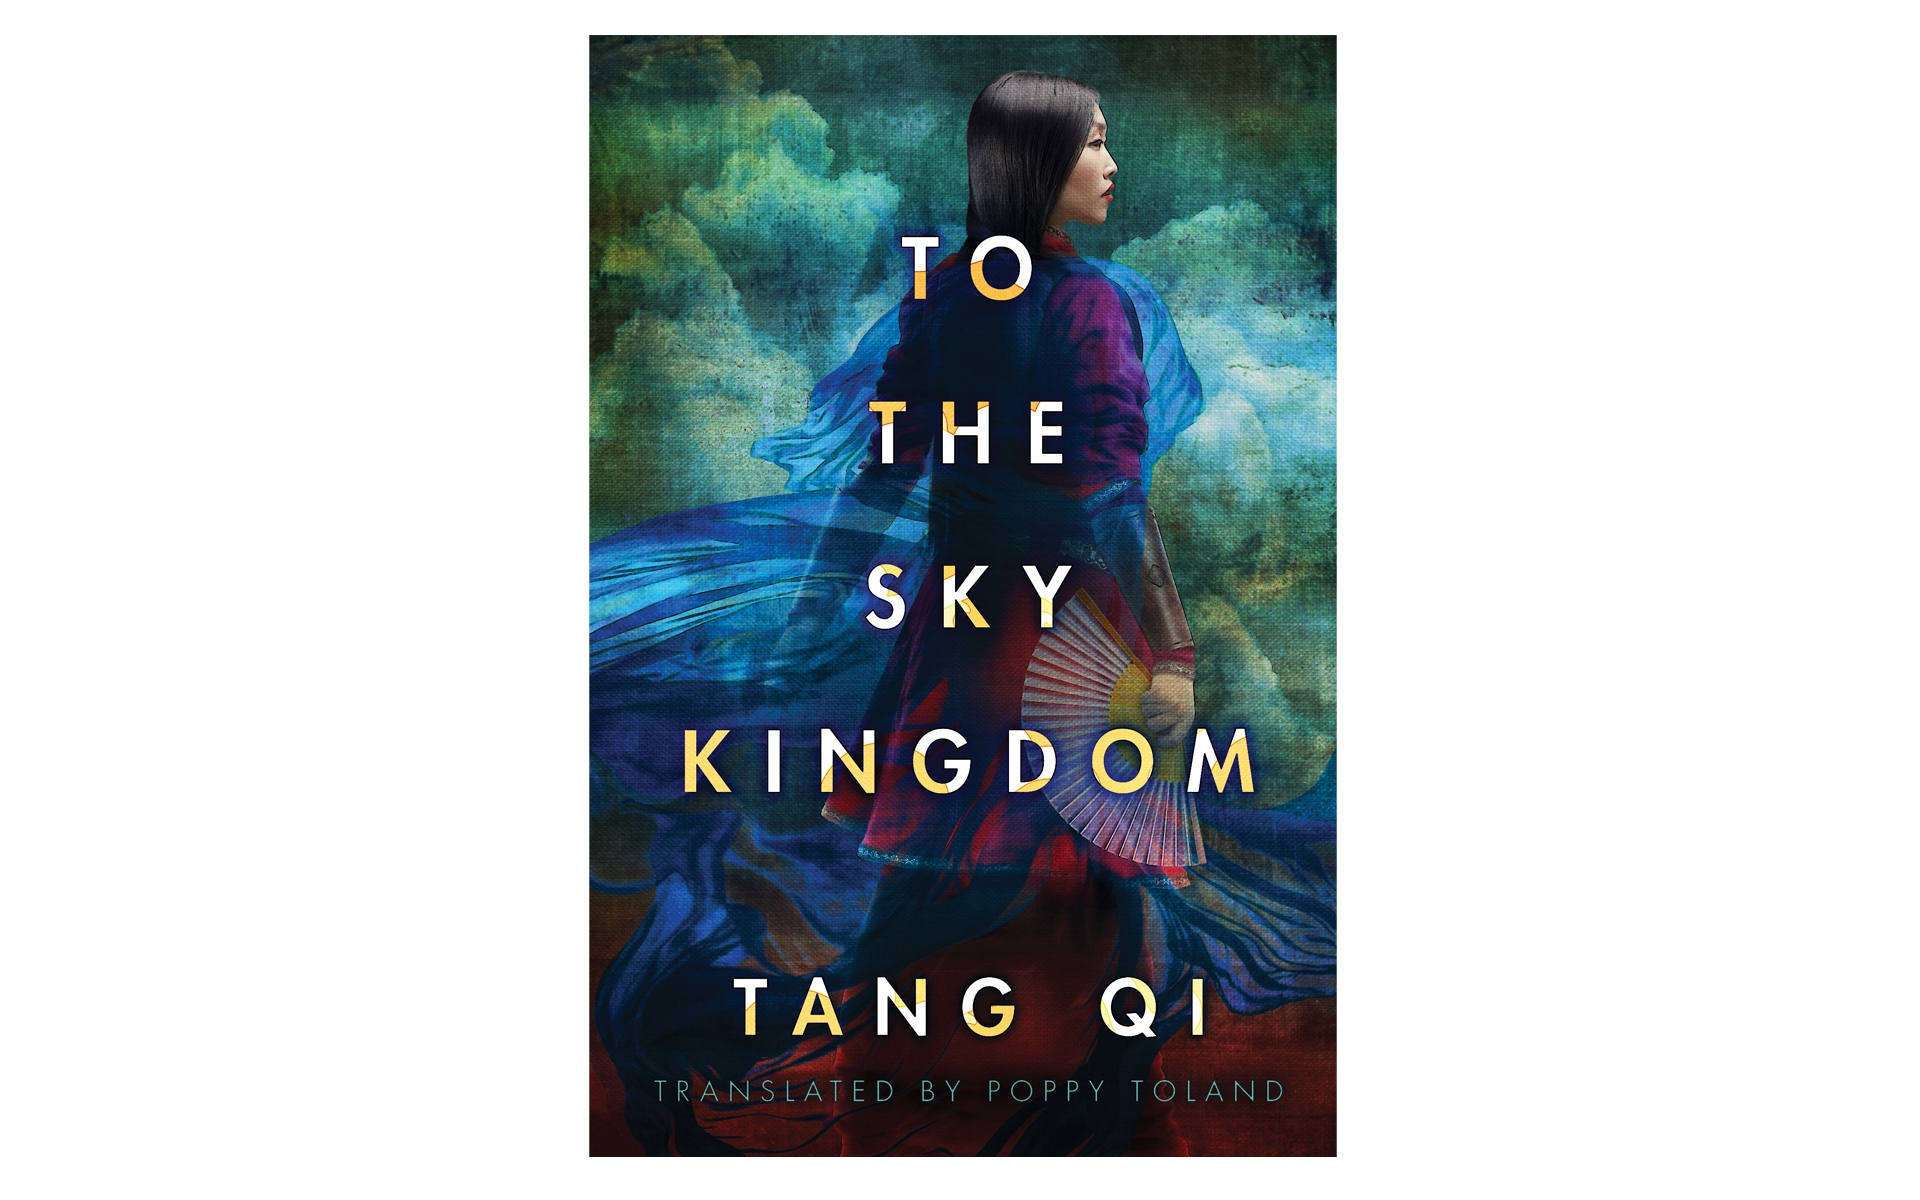 Cover art for the book "To The Sky Kingdom"